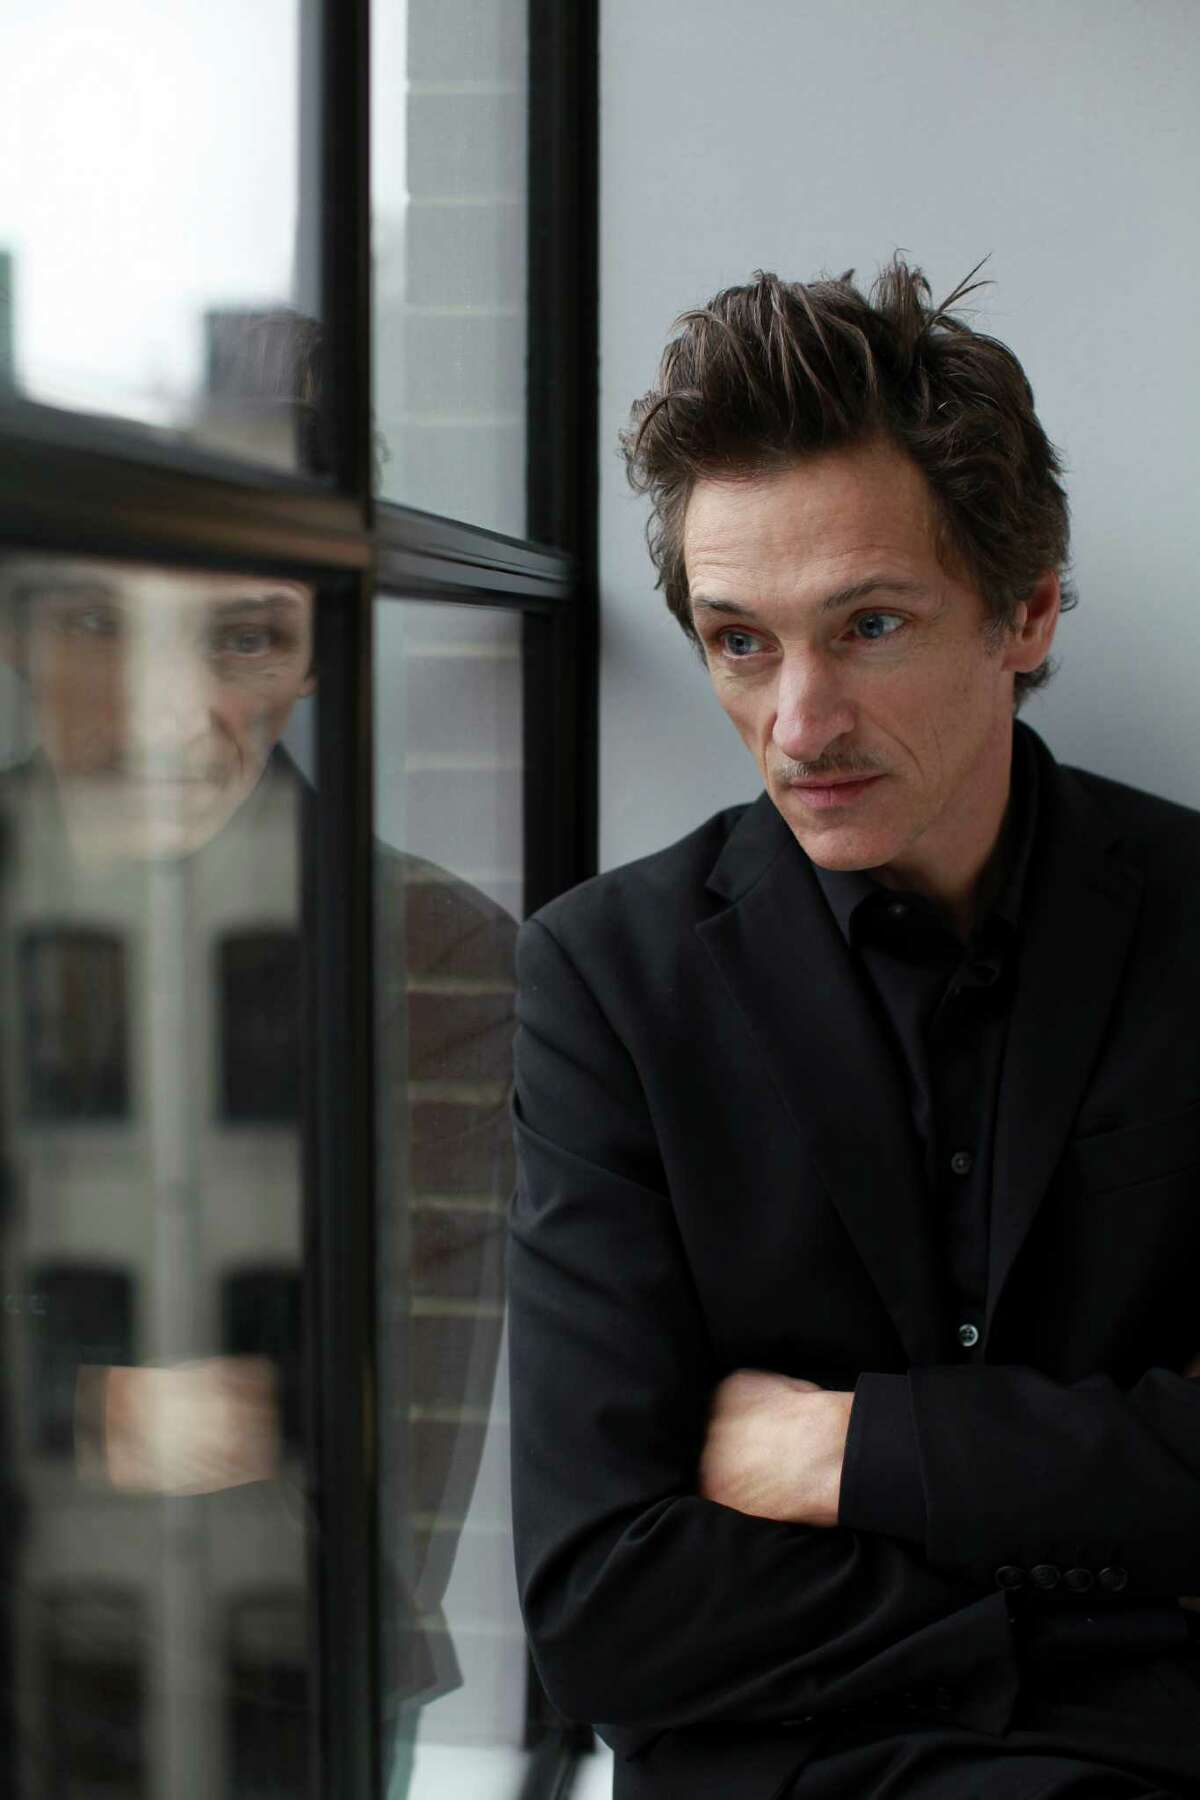 John Hawkes is receiving acclaim for his portrayal of a paralyzed man in "The Sessions."